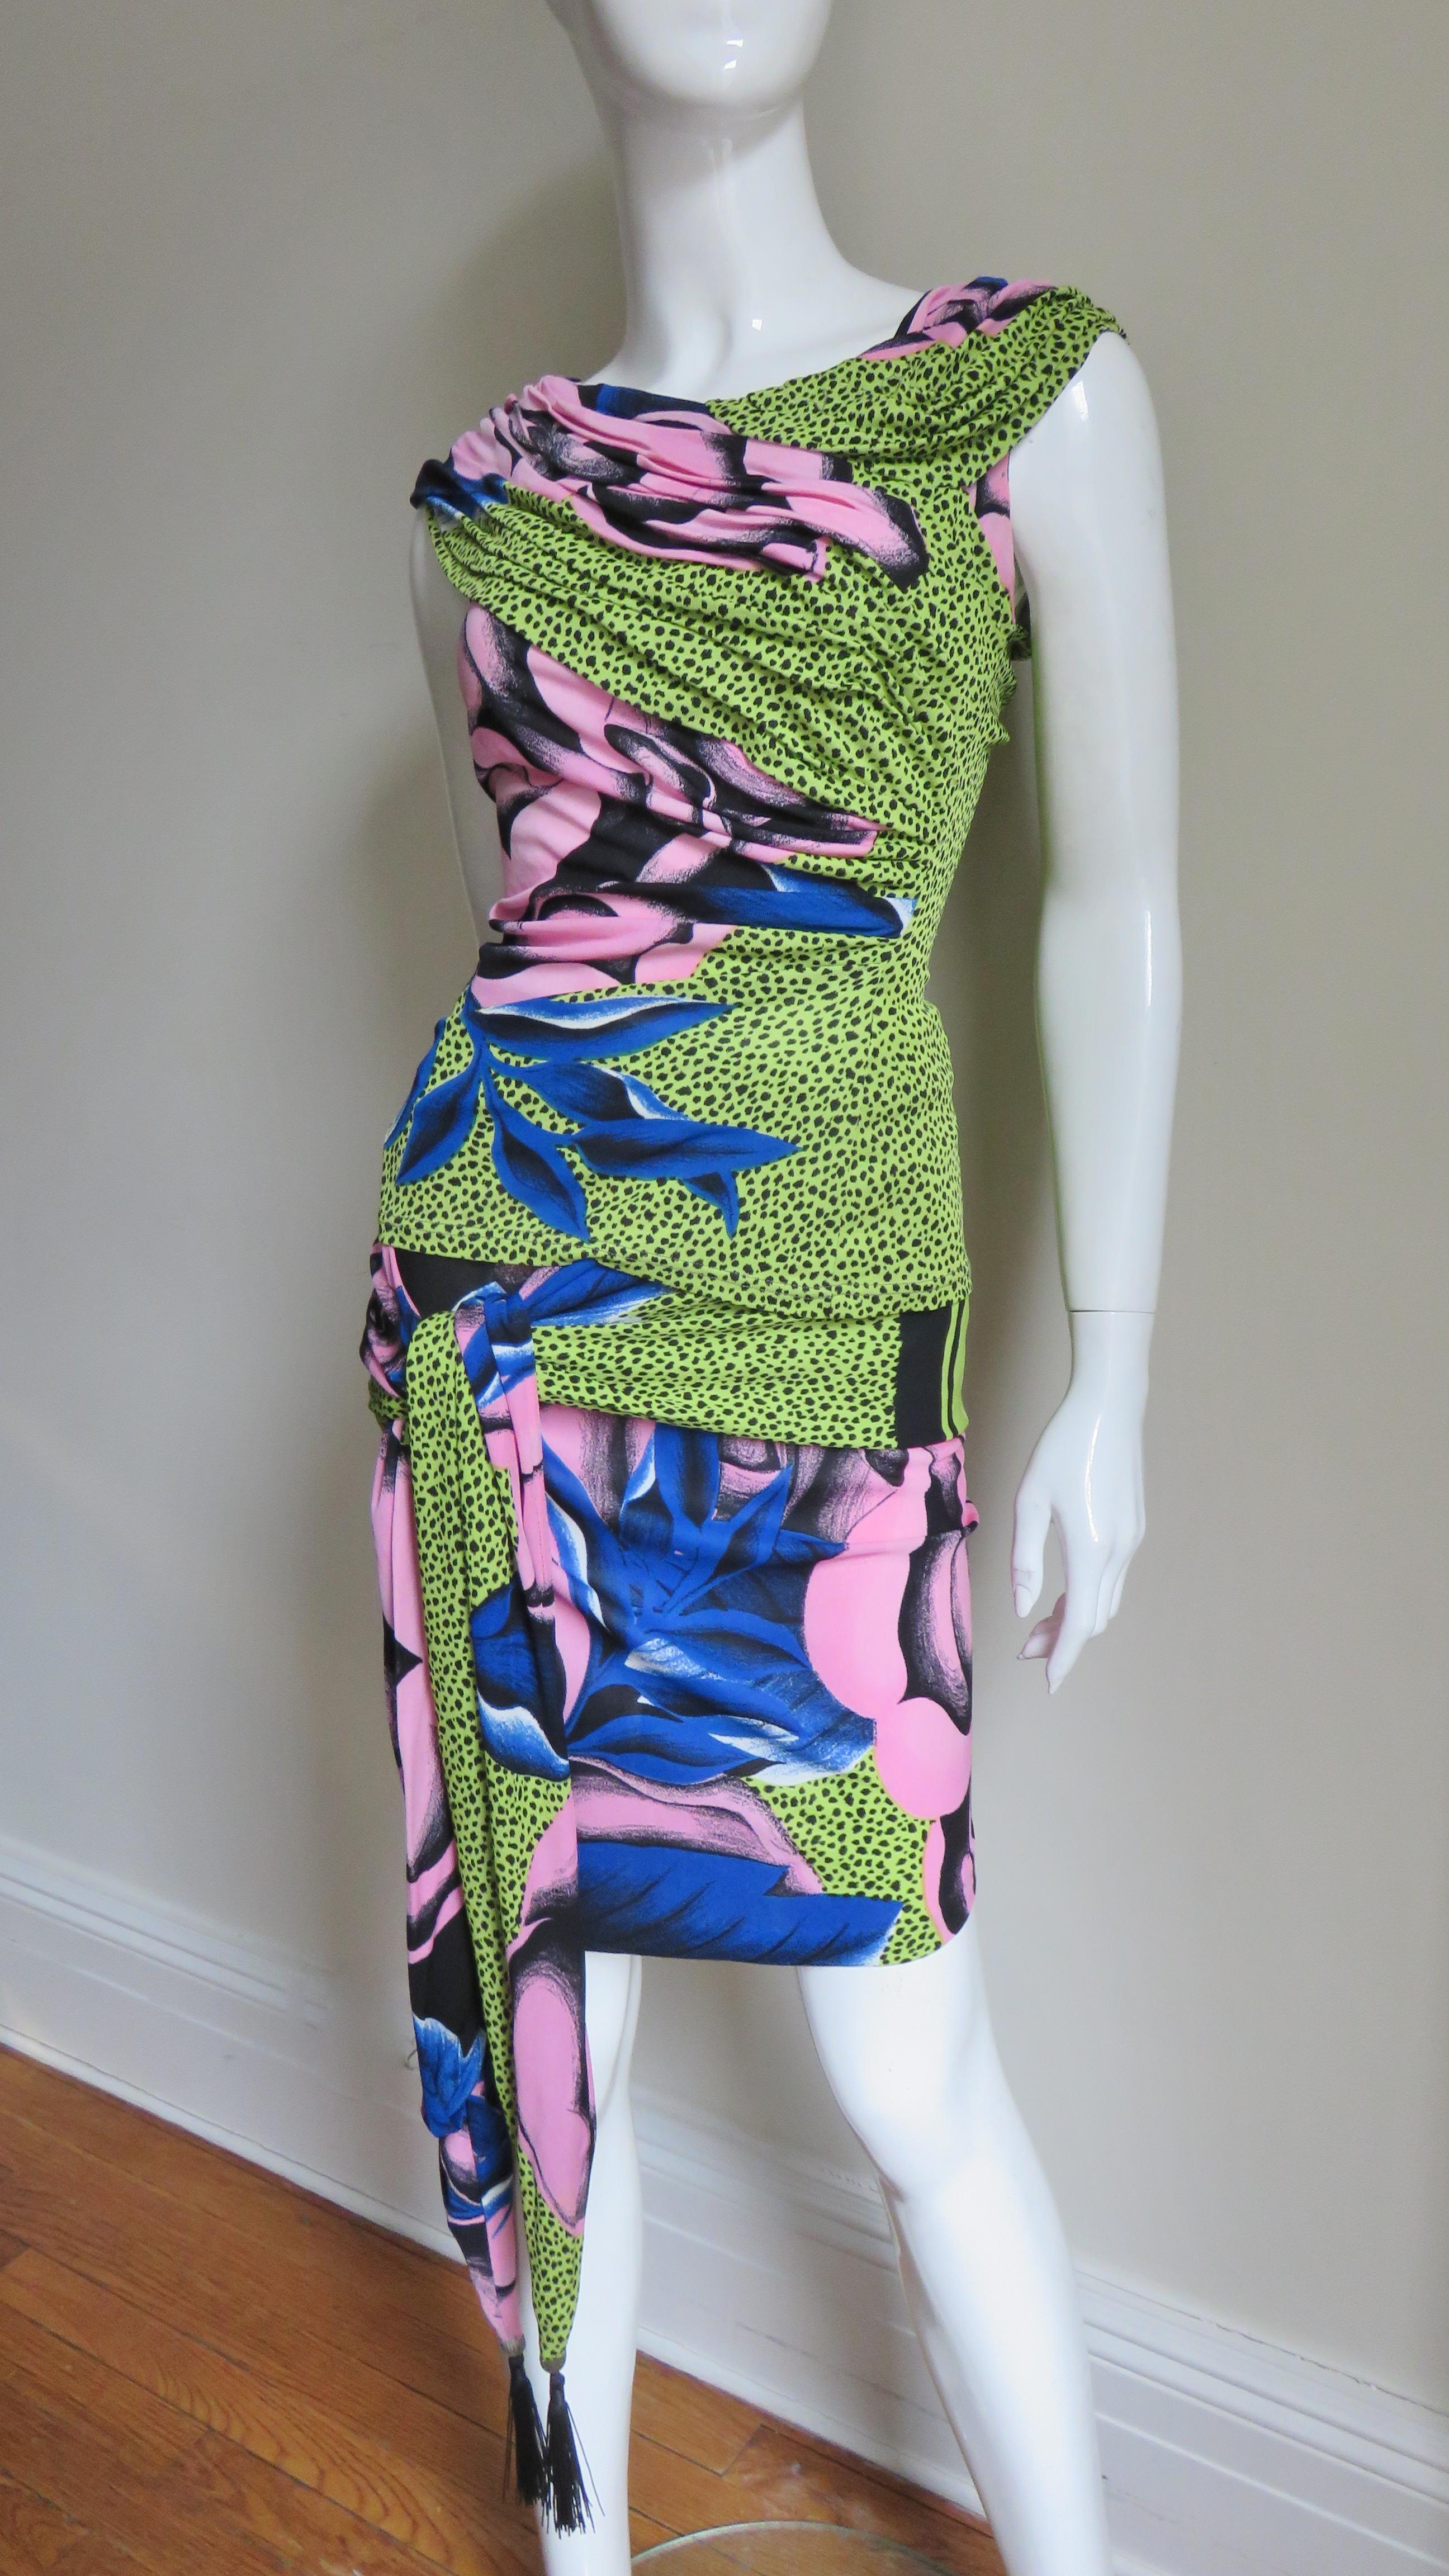 An fabulous jersey skirt and top set from an early collection of Gianni Versace in a bold pattern of pink flowers and blue leaves on a lime green background. The fitted top is ruched over the shoulders and diagonally across the front.  The skirt has